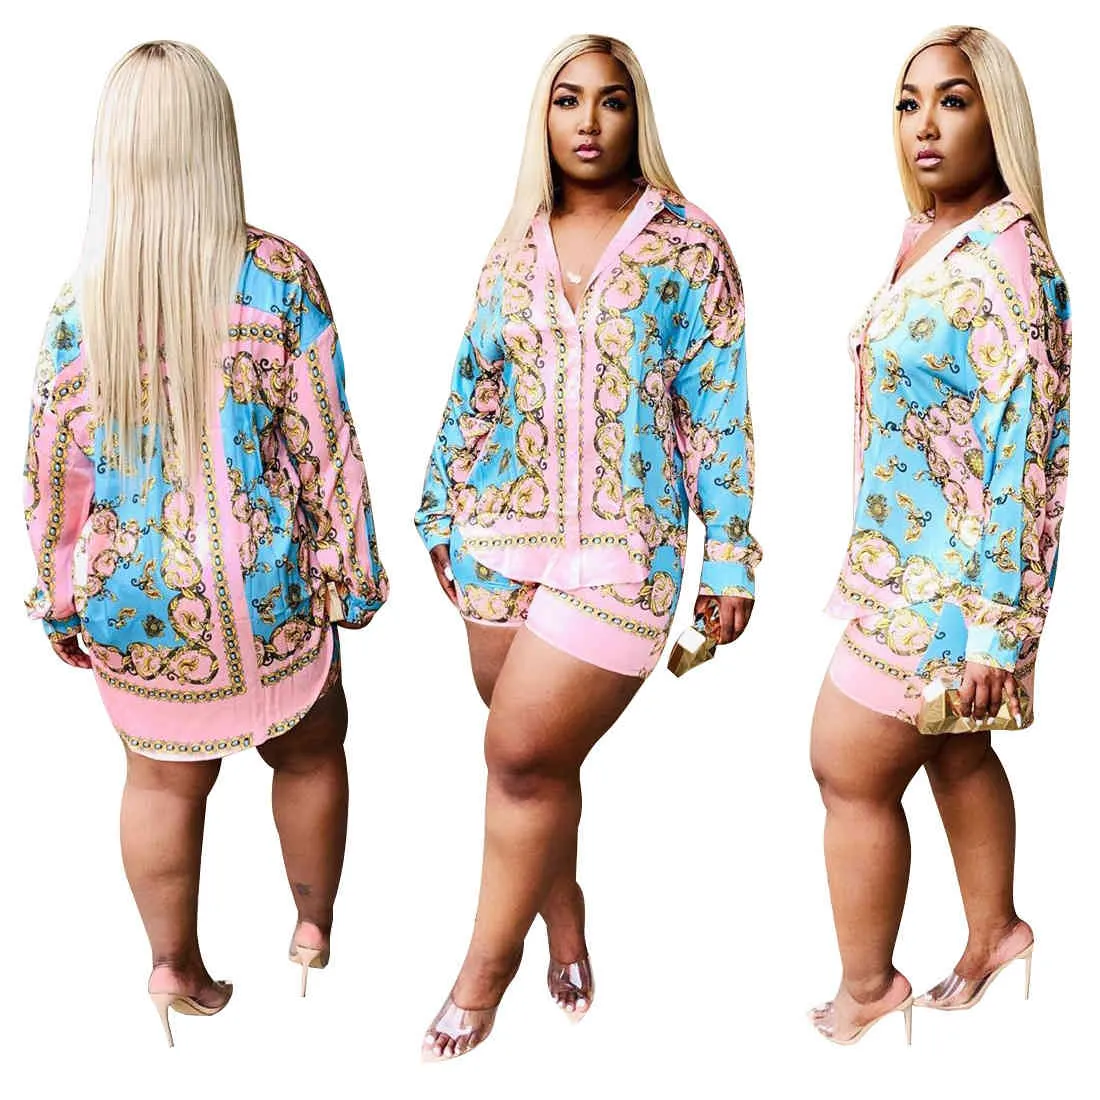 2020 Women Sets Summer Africa Print Tracksuits Shirts+Shorts Suit Two Piece Set Night Club Party Sexy Street Outfits GL129 X0428